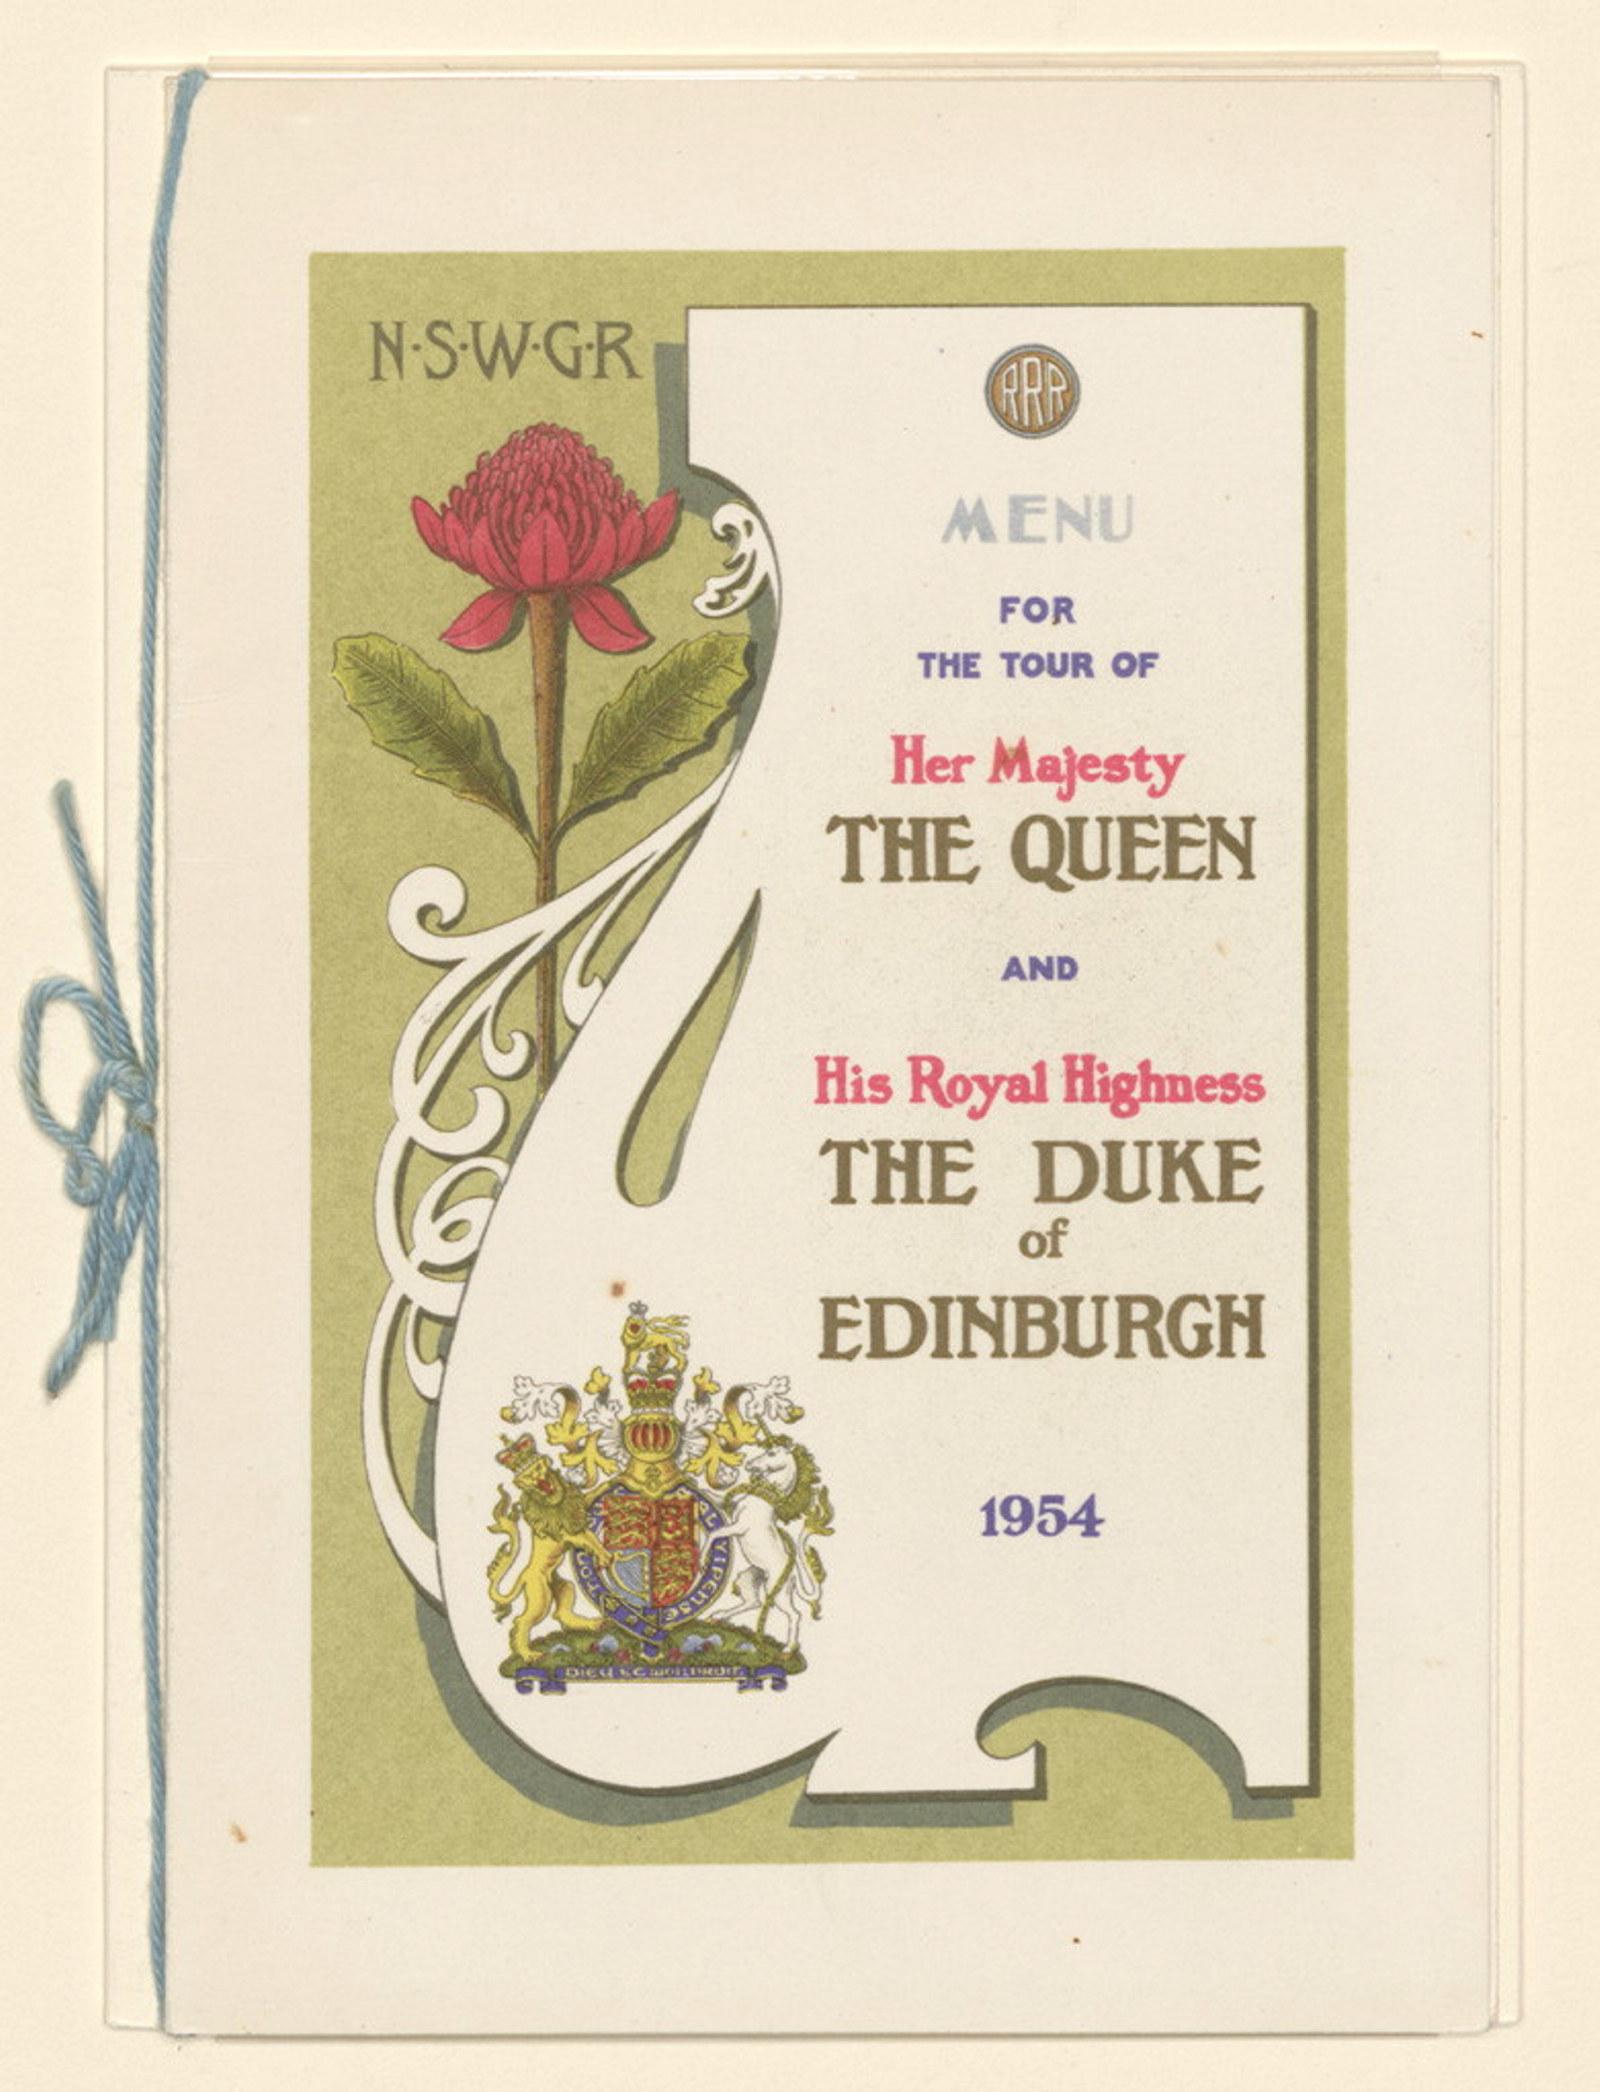 Front cover of menu from the Royal Train